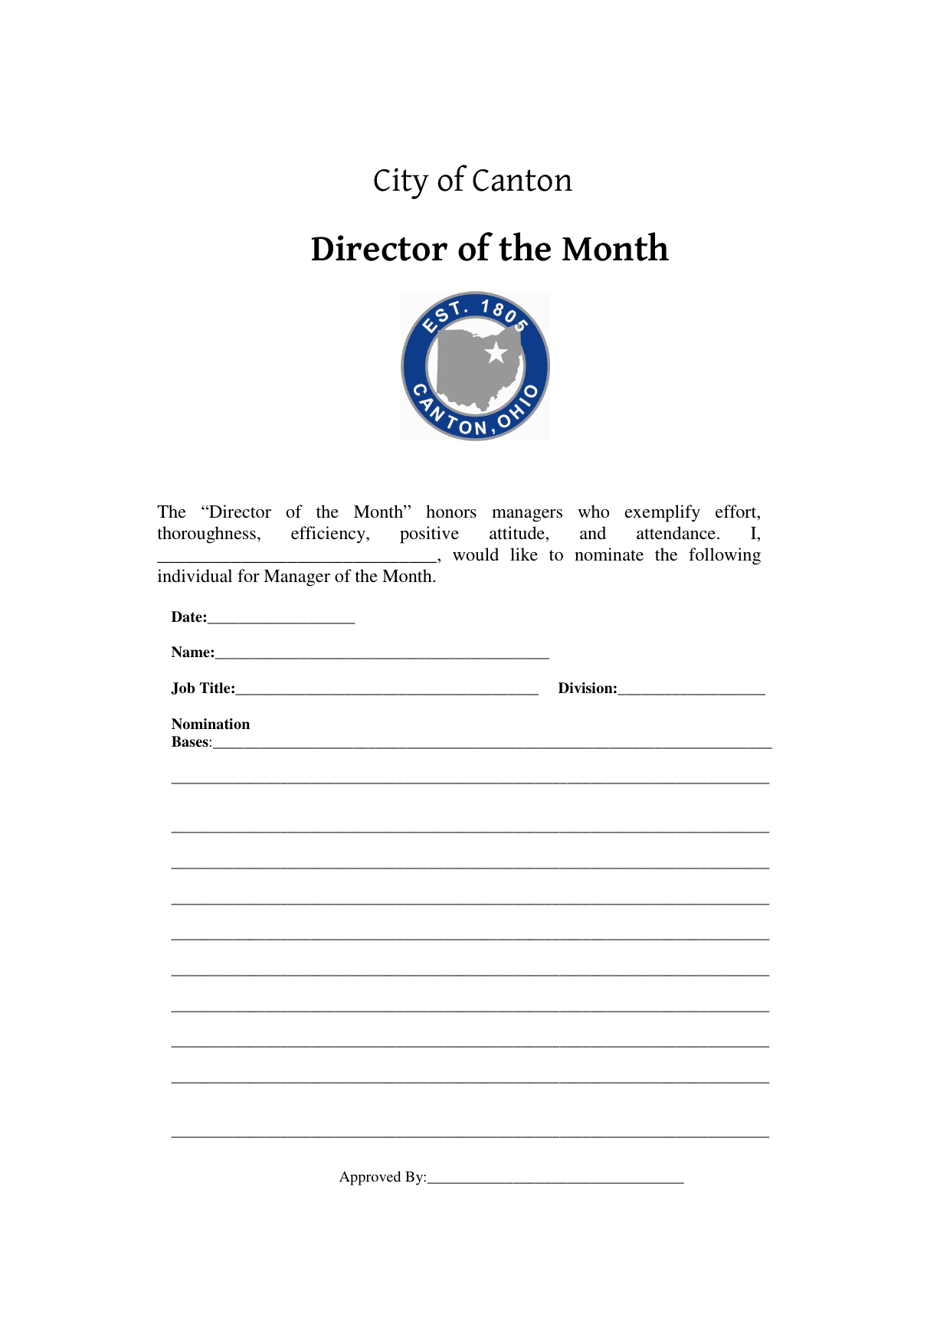 Director of the Month Nomination Form - City of Canton, Ohio, Page 1